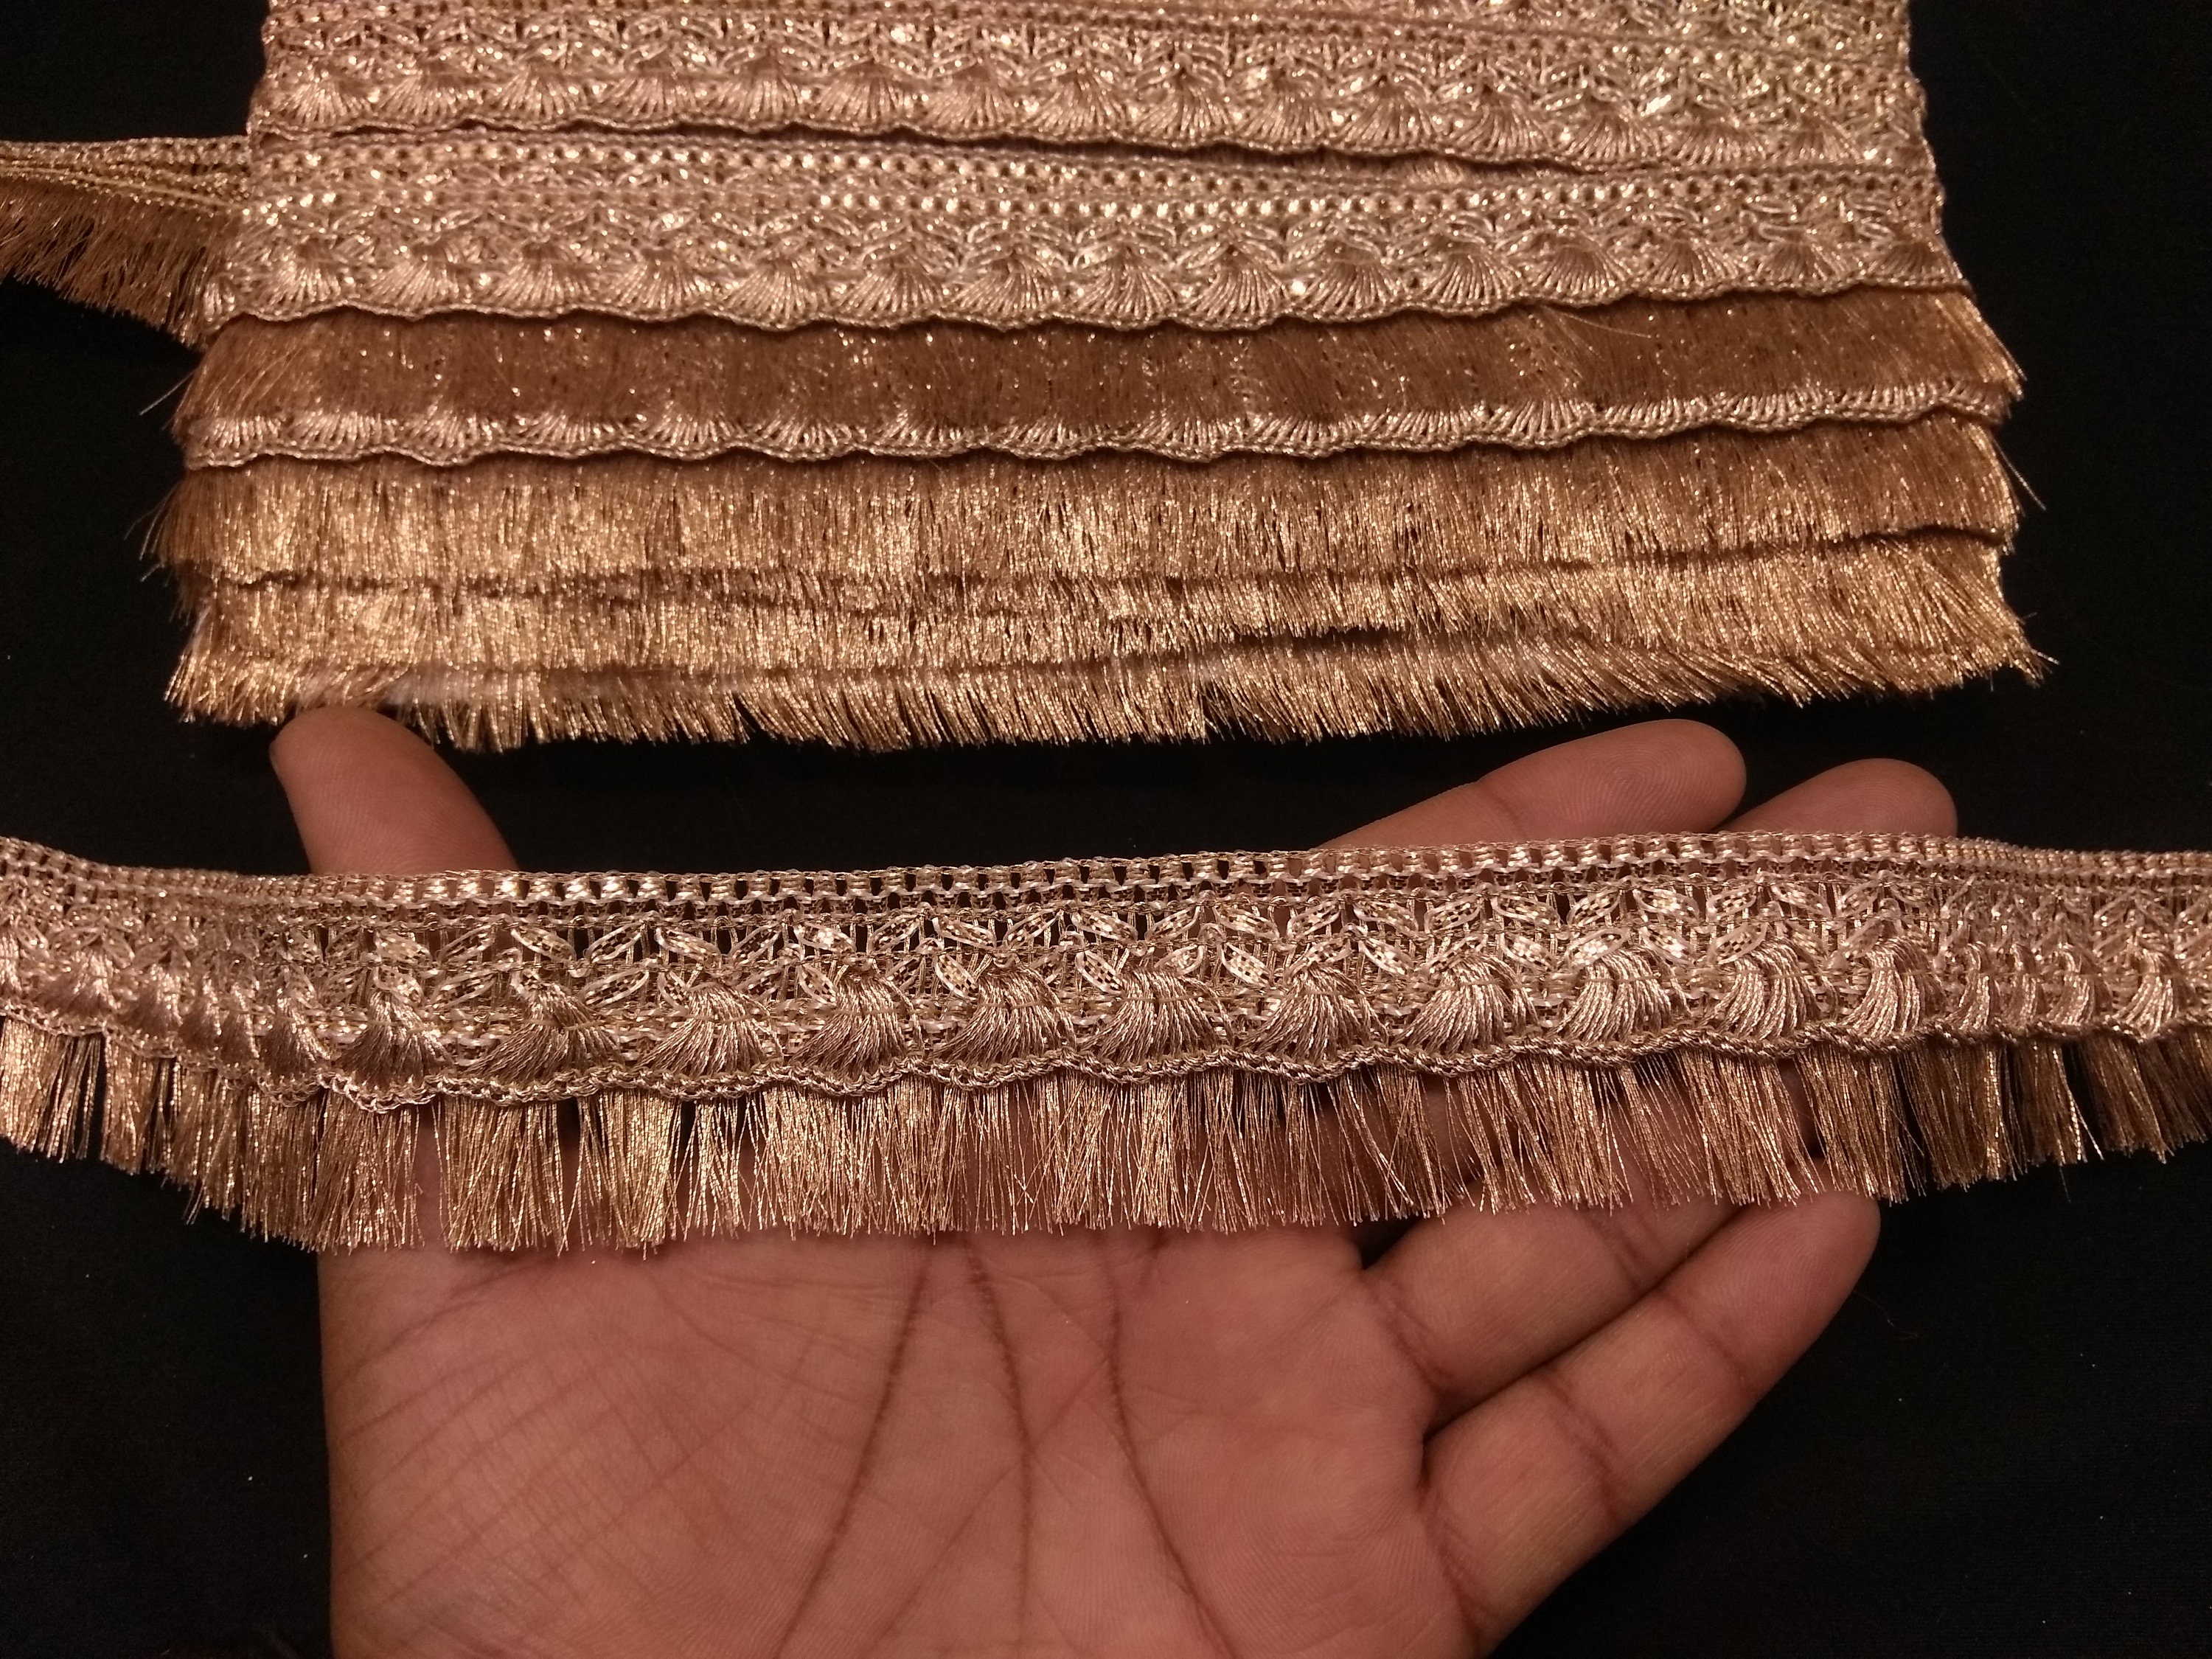 COHEALI 1 Roll Fringe Fringe Lace Gold Fringes Embroidery Floral Trim  Apparel Craft Lace Sewing Fringe Trim Gold Trim for Sewing Bullion Trim  Macrame